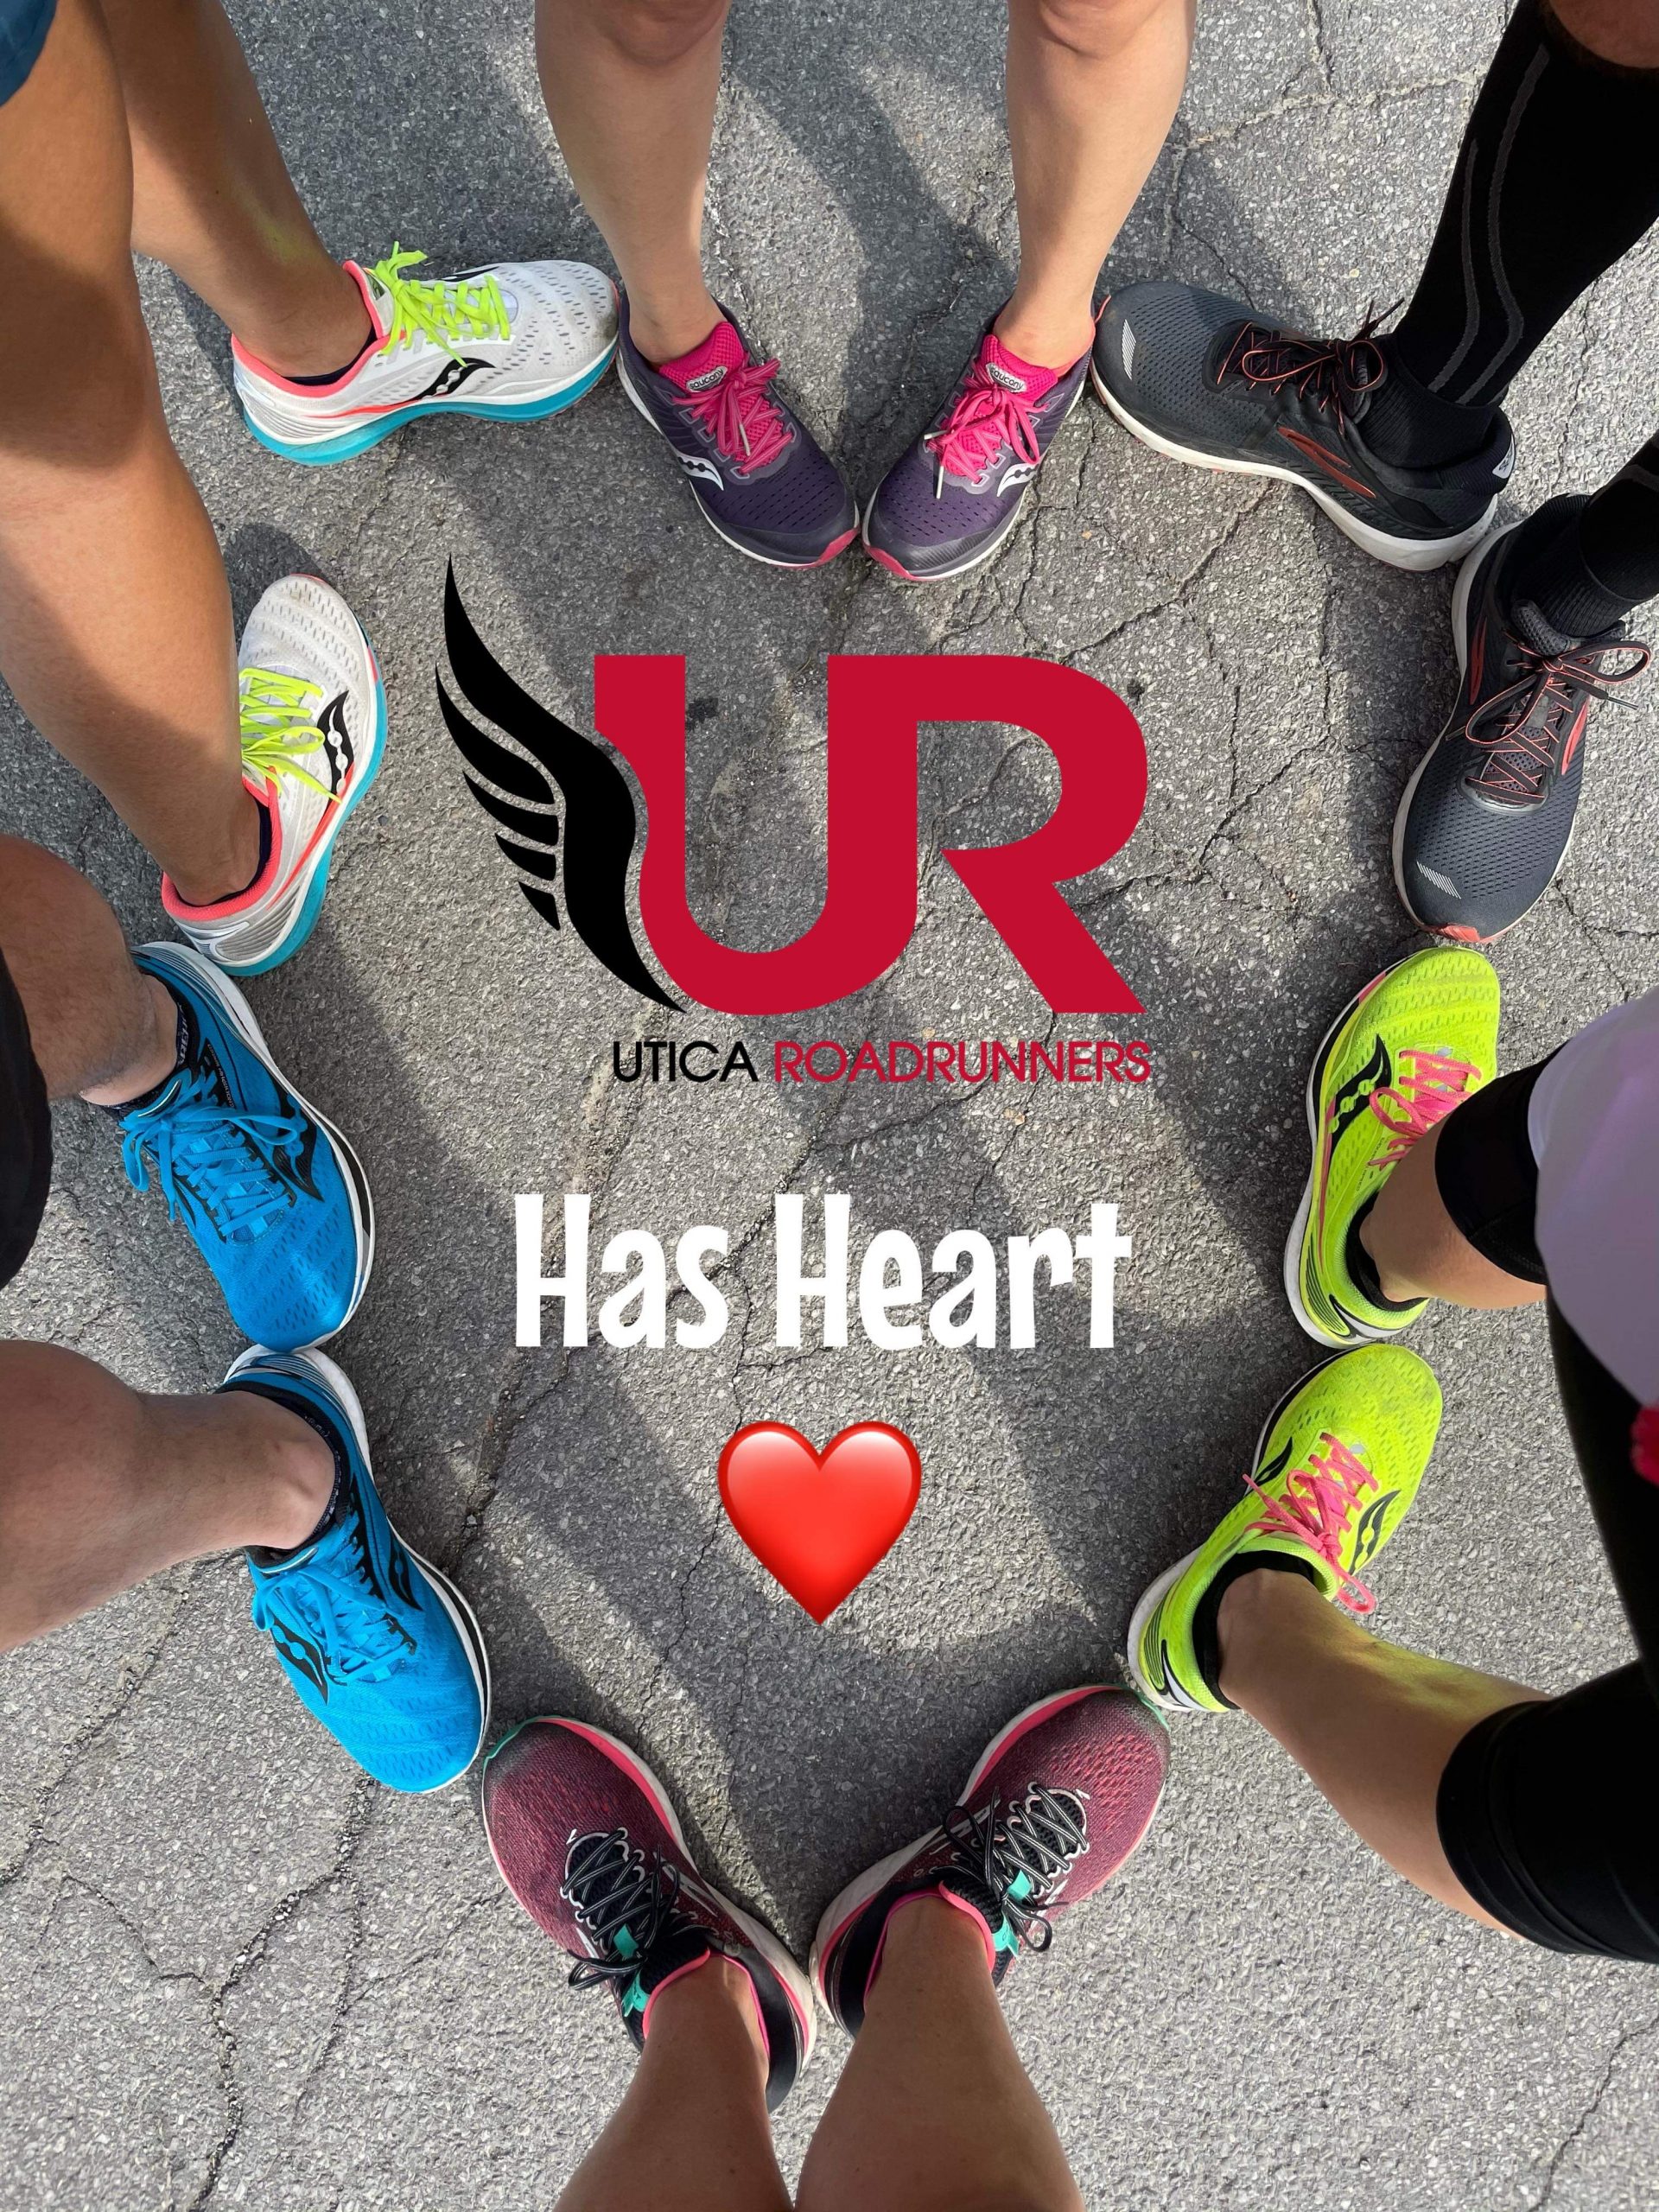 Running shoes lined up in a heart shape